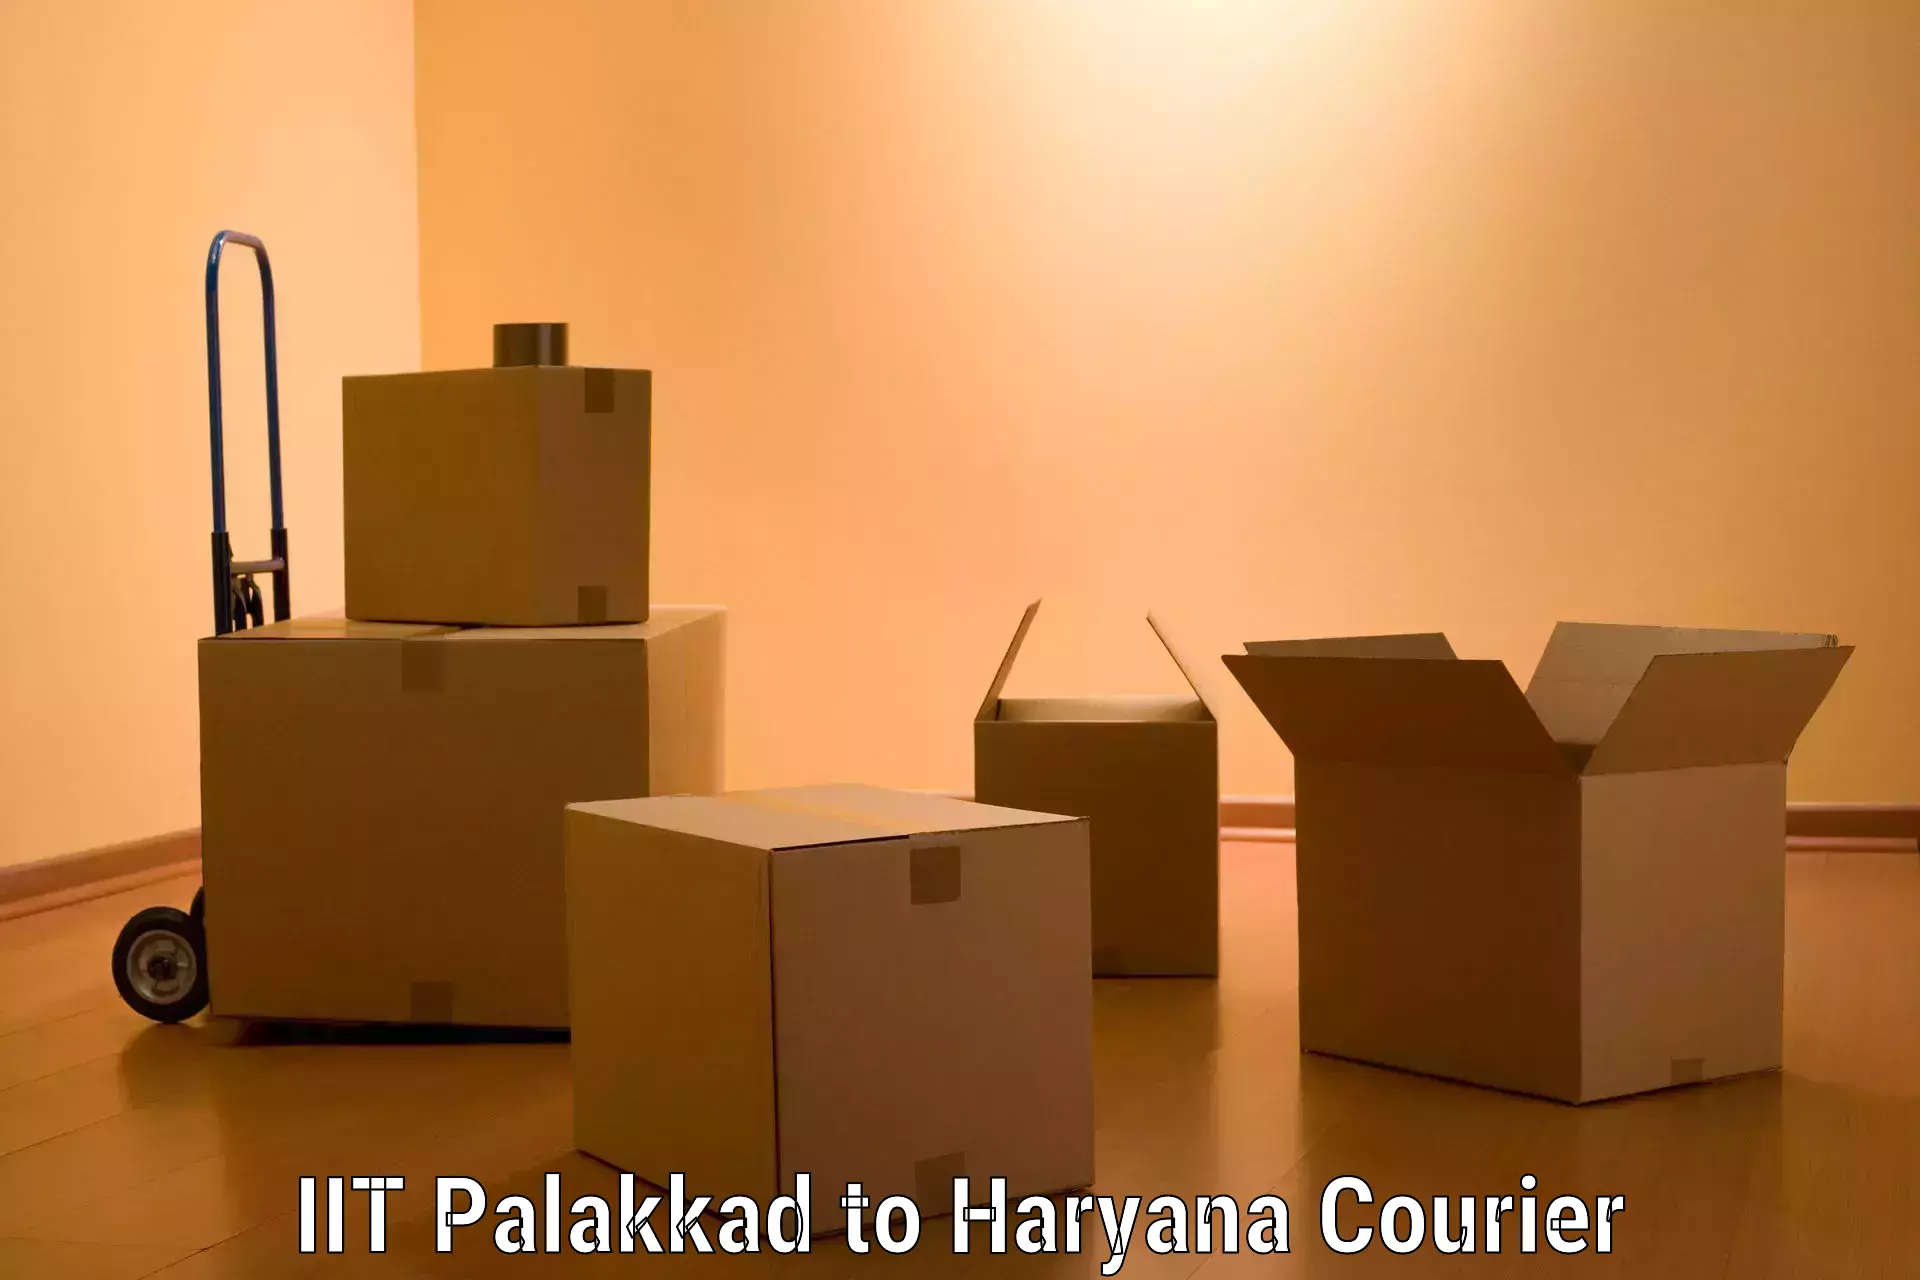 Moving and storage services IIT Palakkad to Hansi